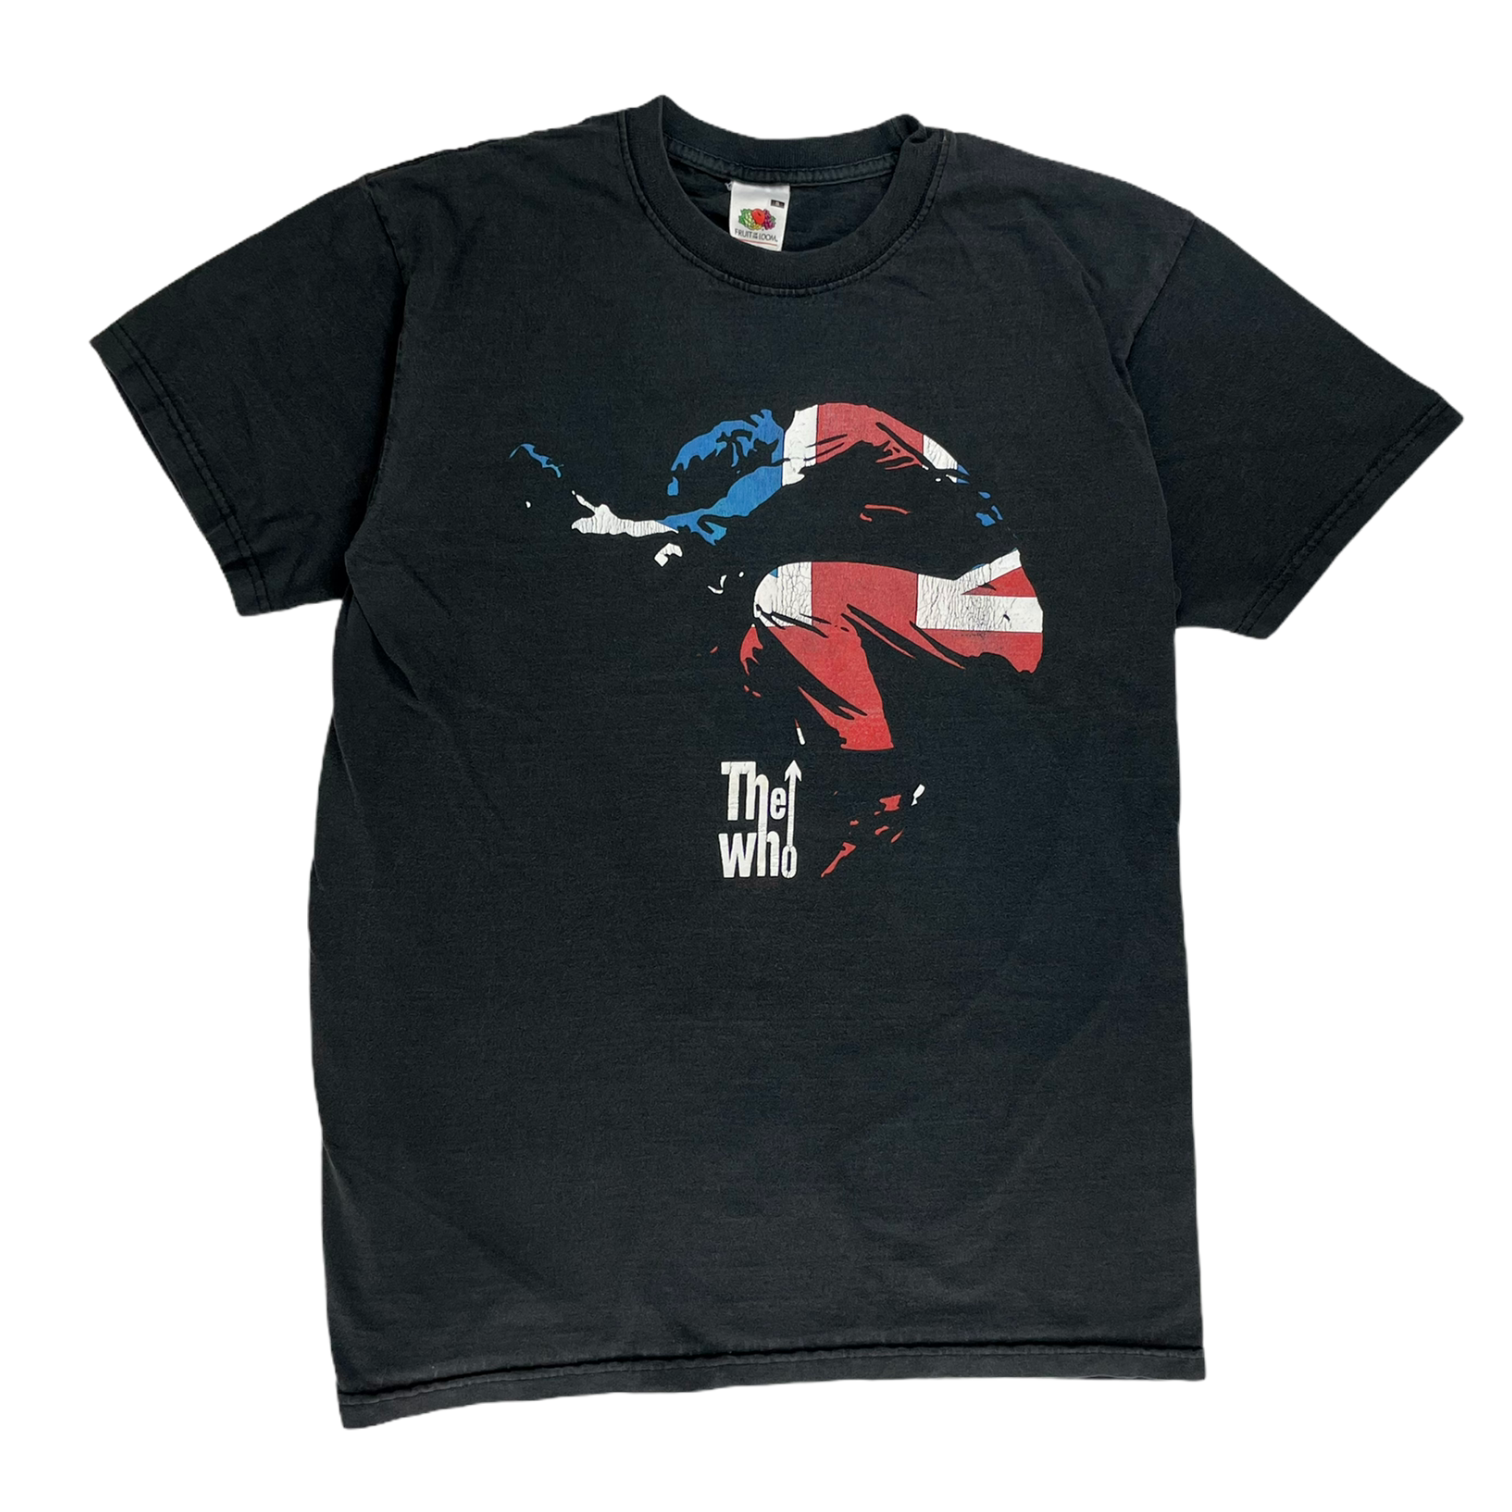 Vintage THE WHO T-Shirt - Restorecph